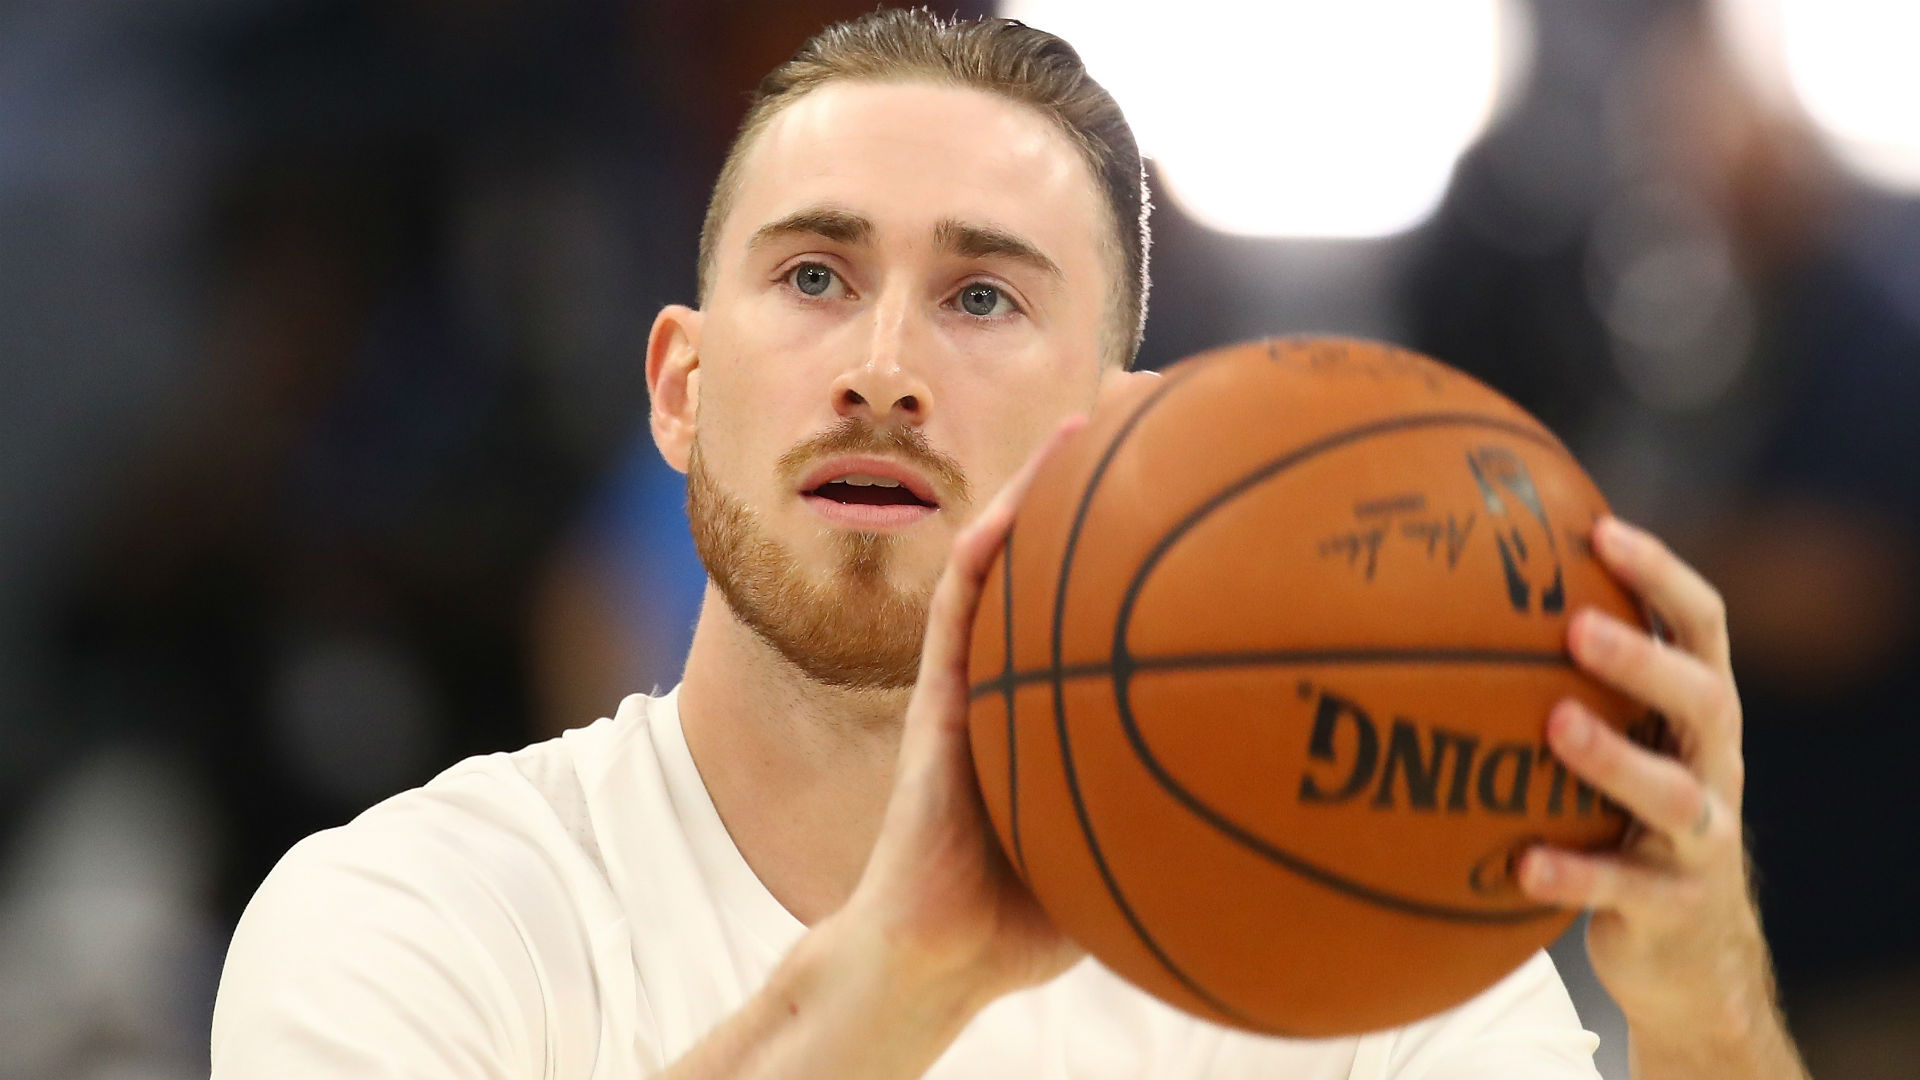 Gordon Hayward showed good signs in his recovery from injury, but the Boston Celtics forward will not return this season.